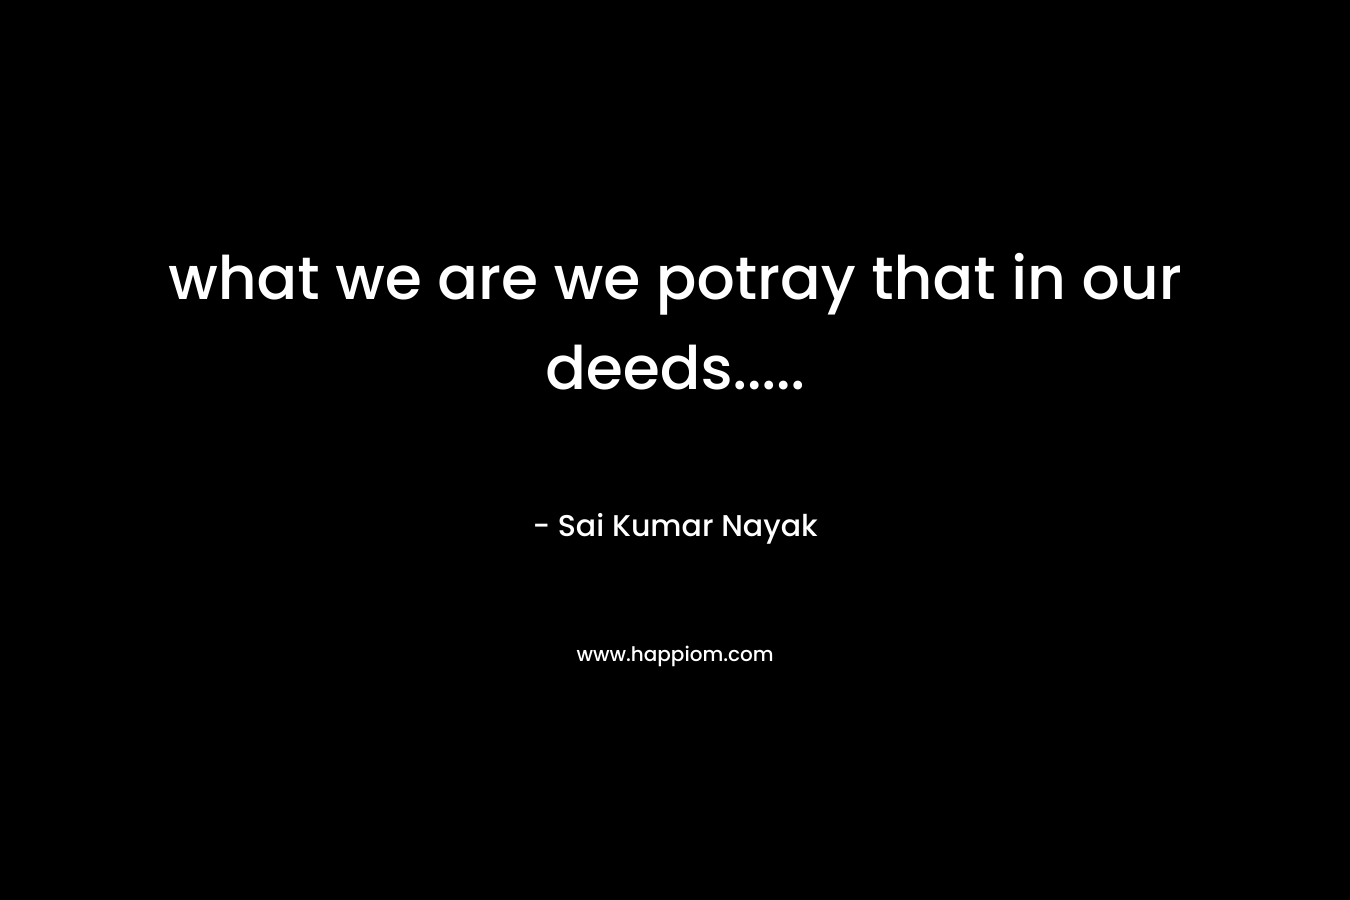 what we are we potray that in our deeds.....